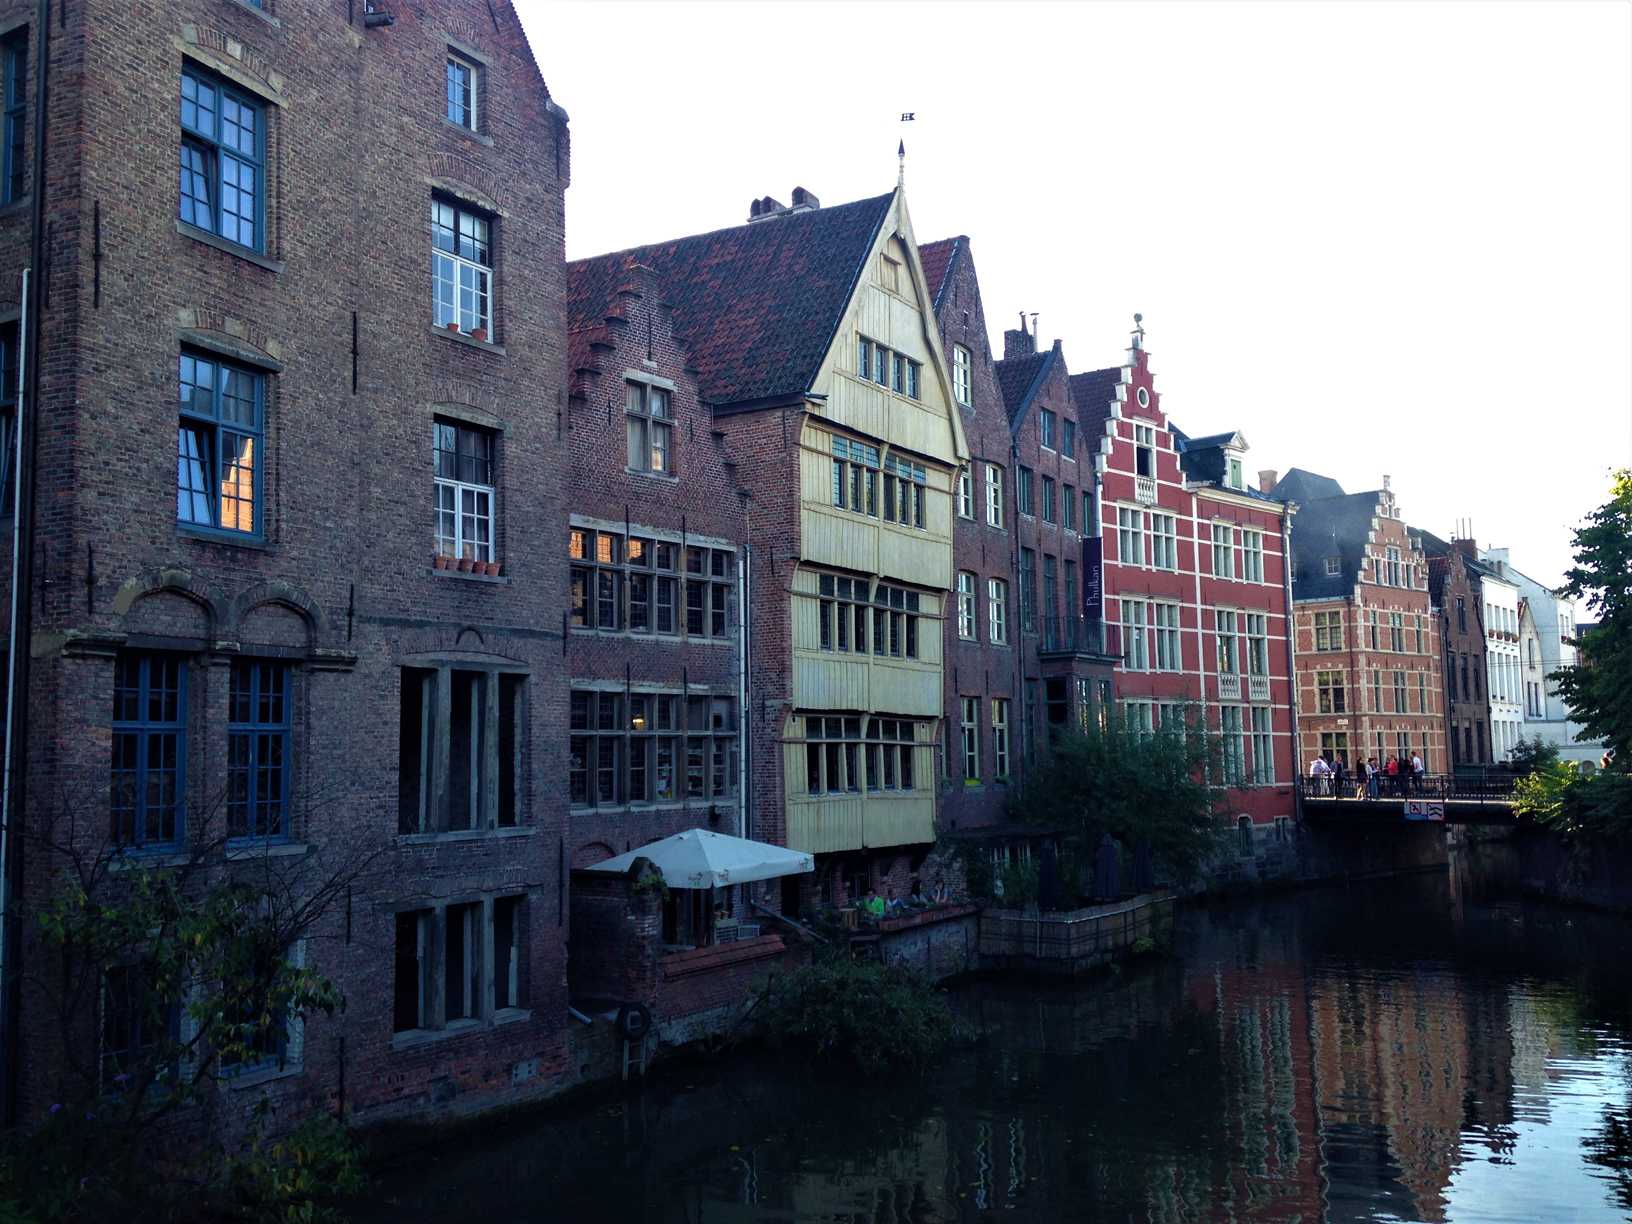 A picture of colorful buildings with gables on a canal in Ghent, Belgium.